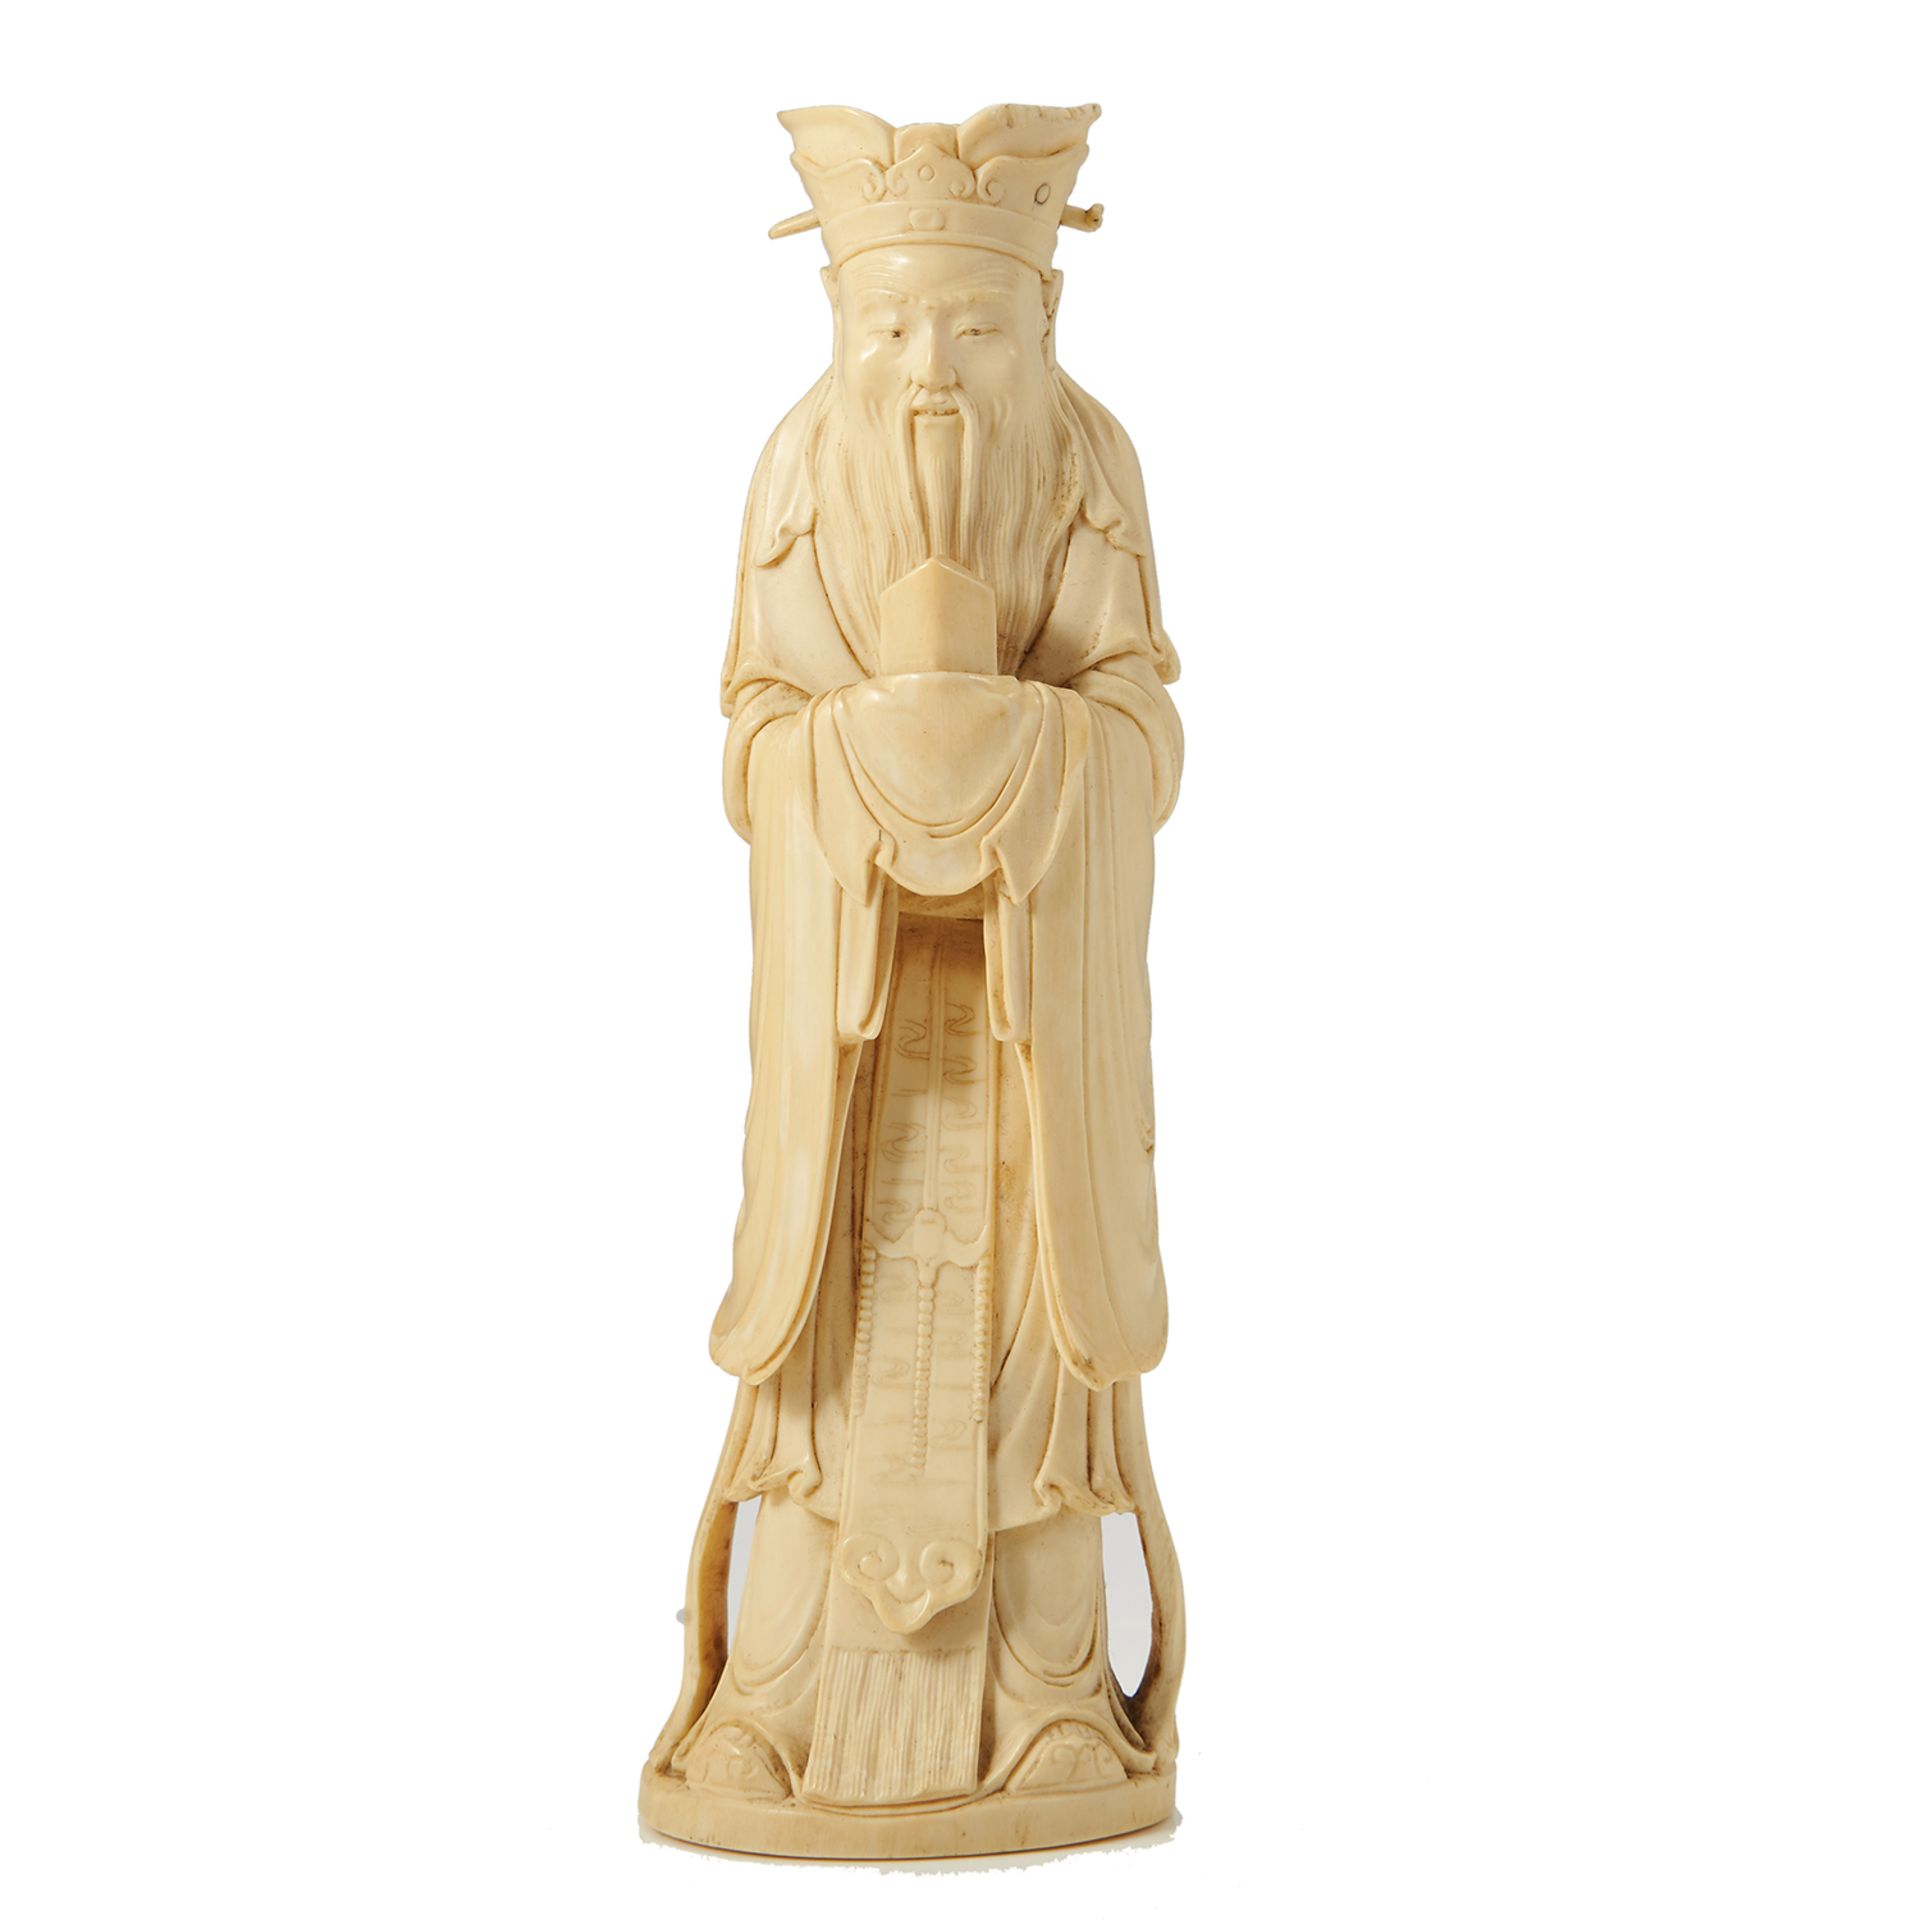 AN ANTIQUE CHINESE CARVED IVORY FIGURE, QING DYNASTY carved in detail to depict an elderly gentleman